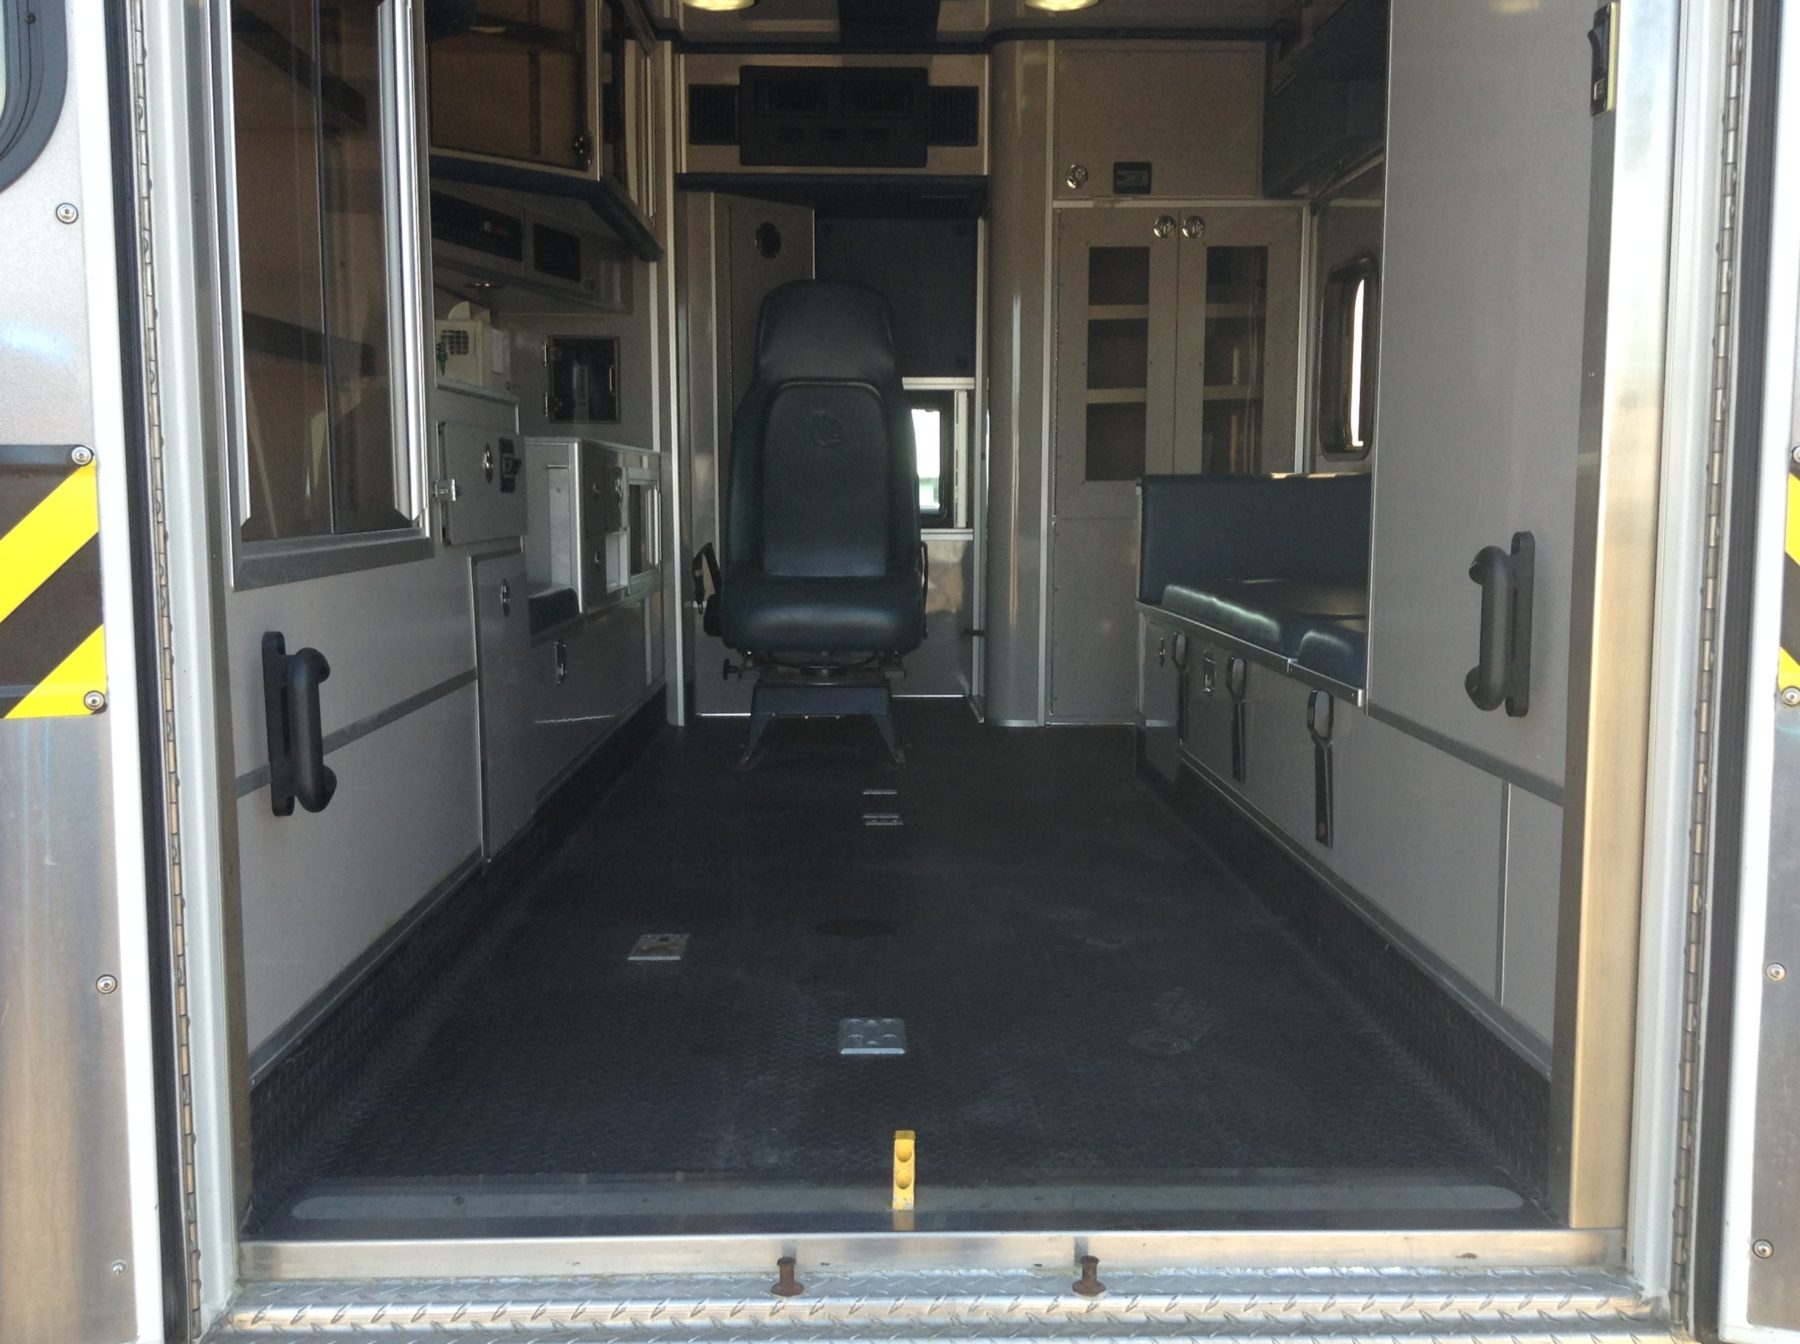 2011 Ford F450 4x4 Heavy Duty Ambulance For Sale – Picture 2